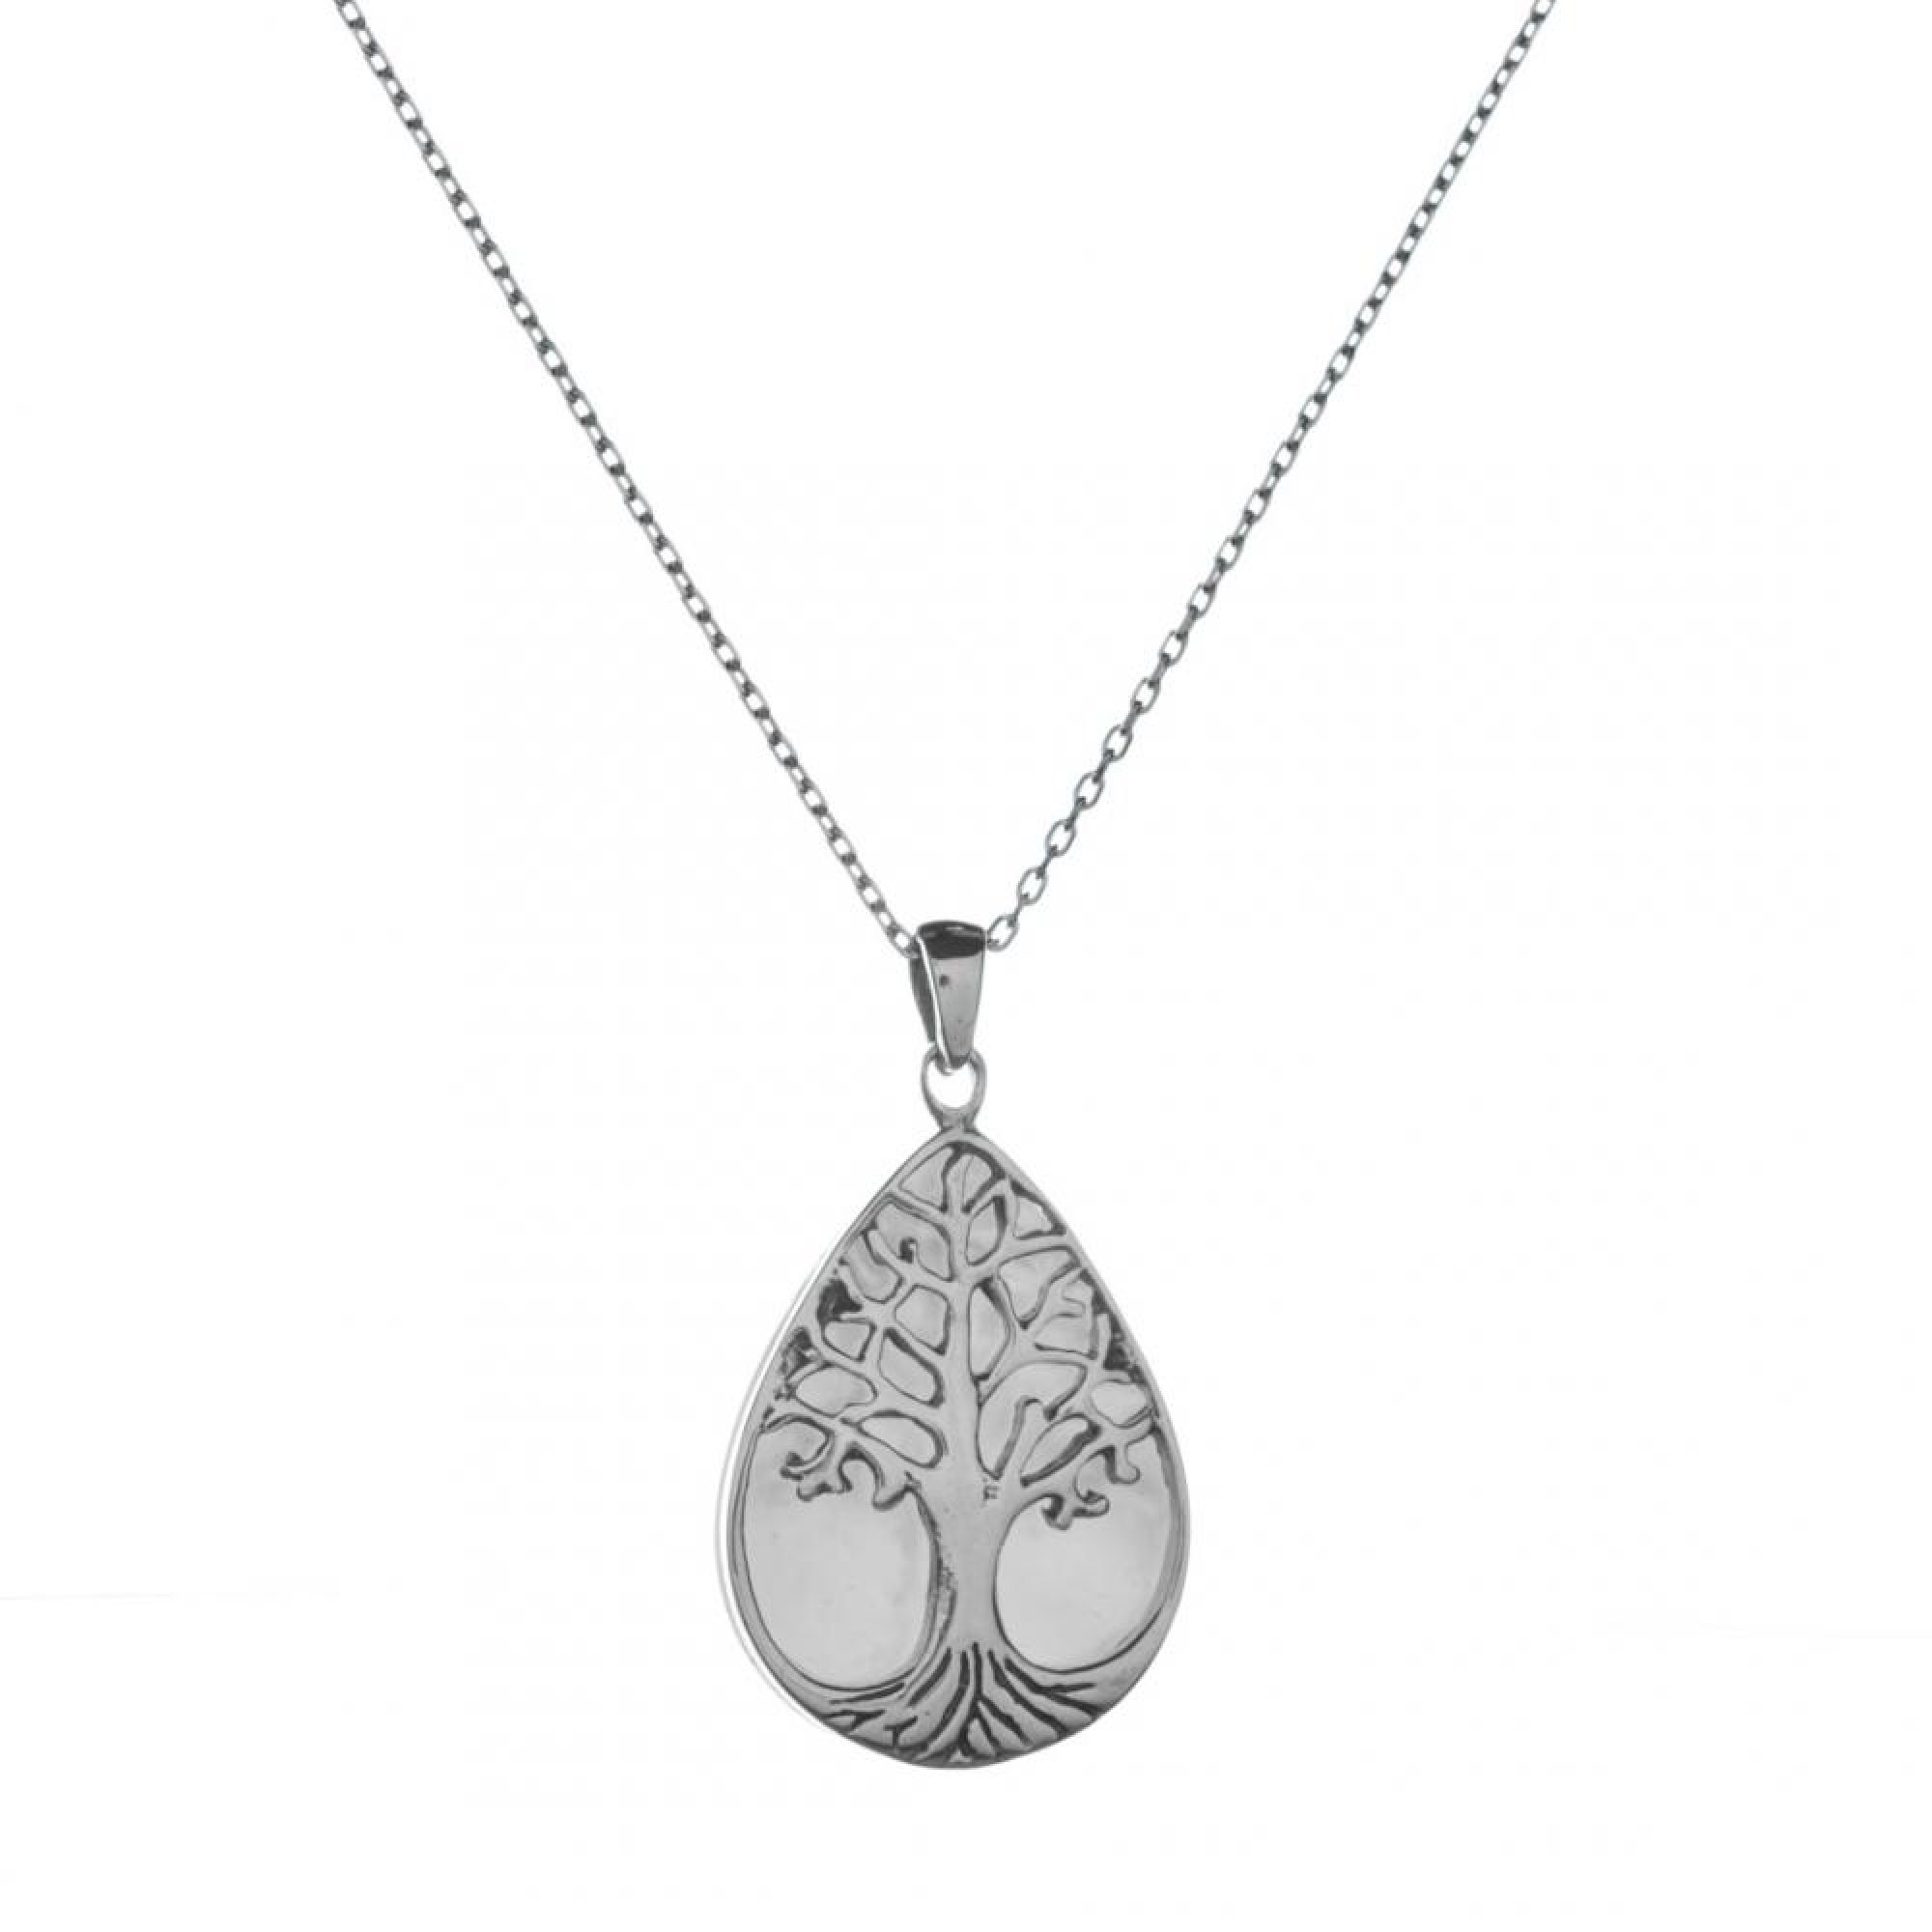 Tree of life necklace with mother of pearl stone